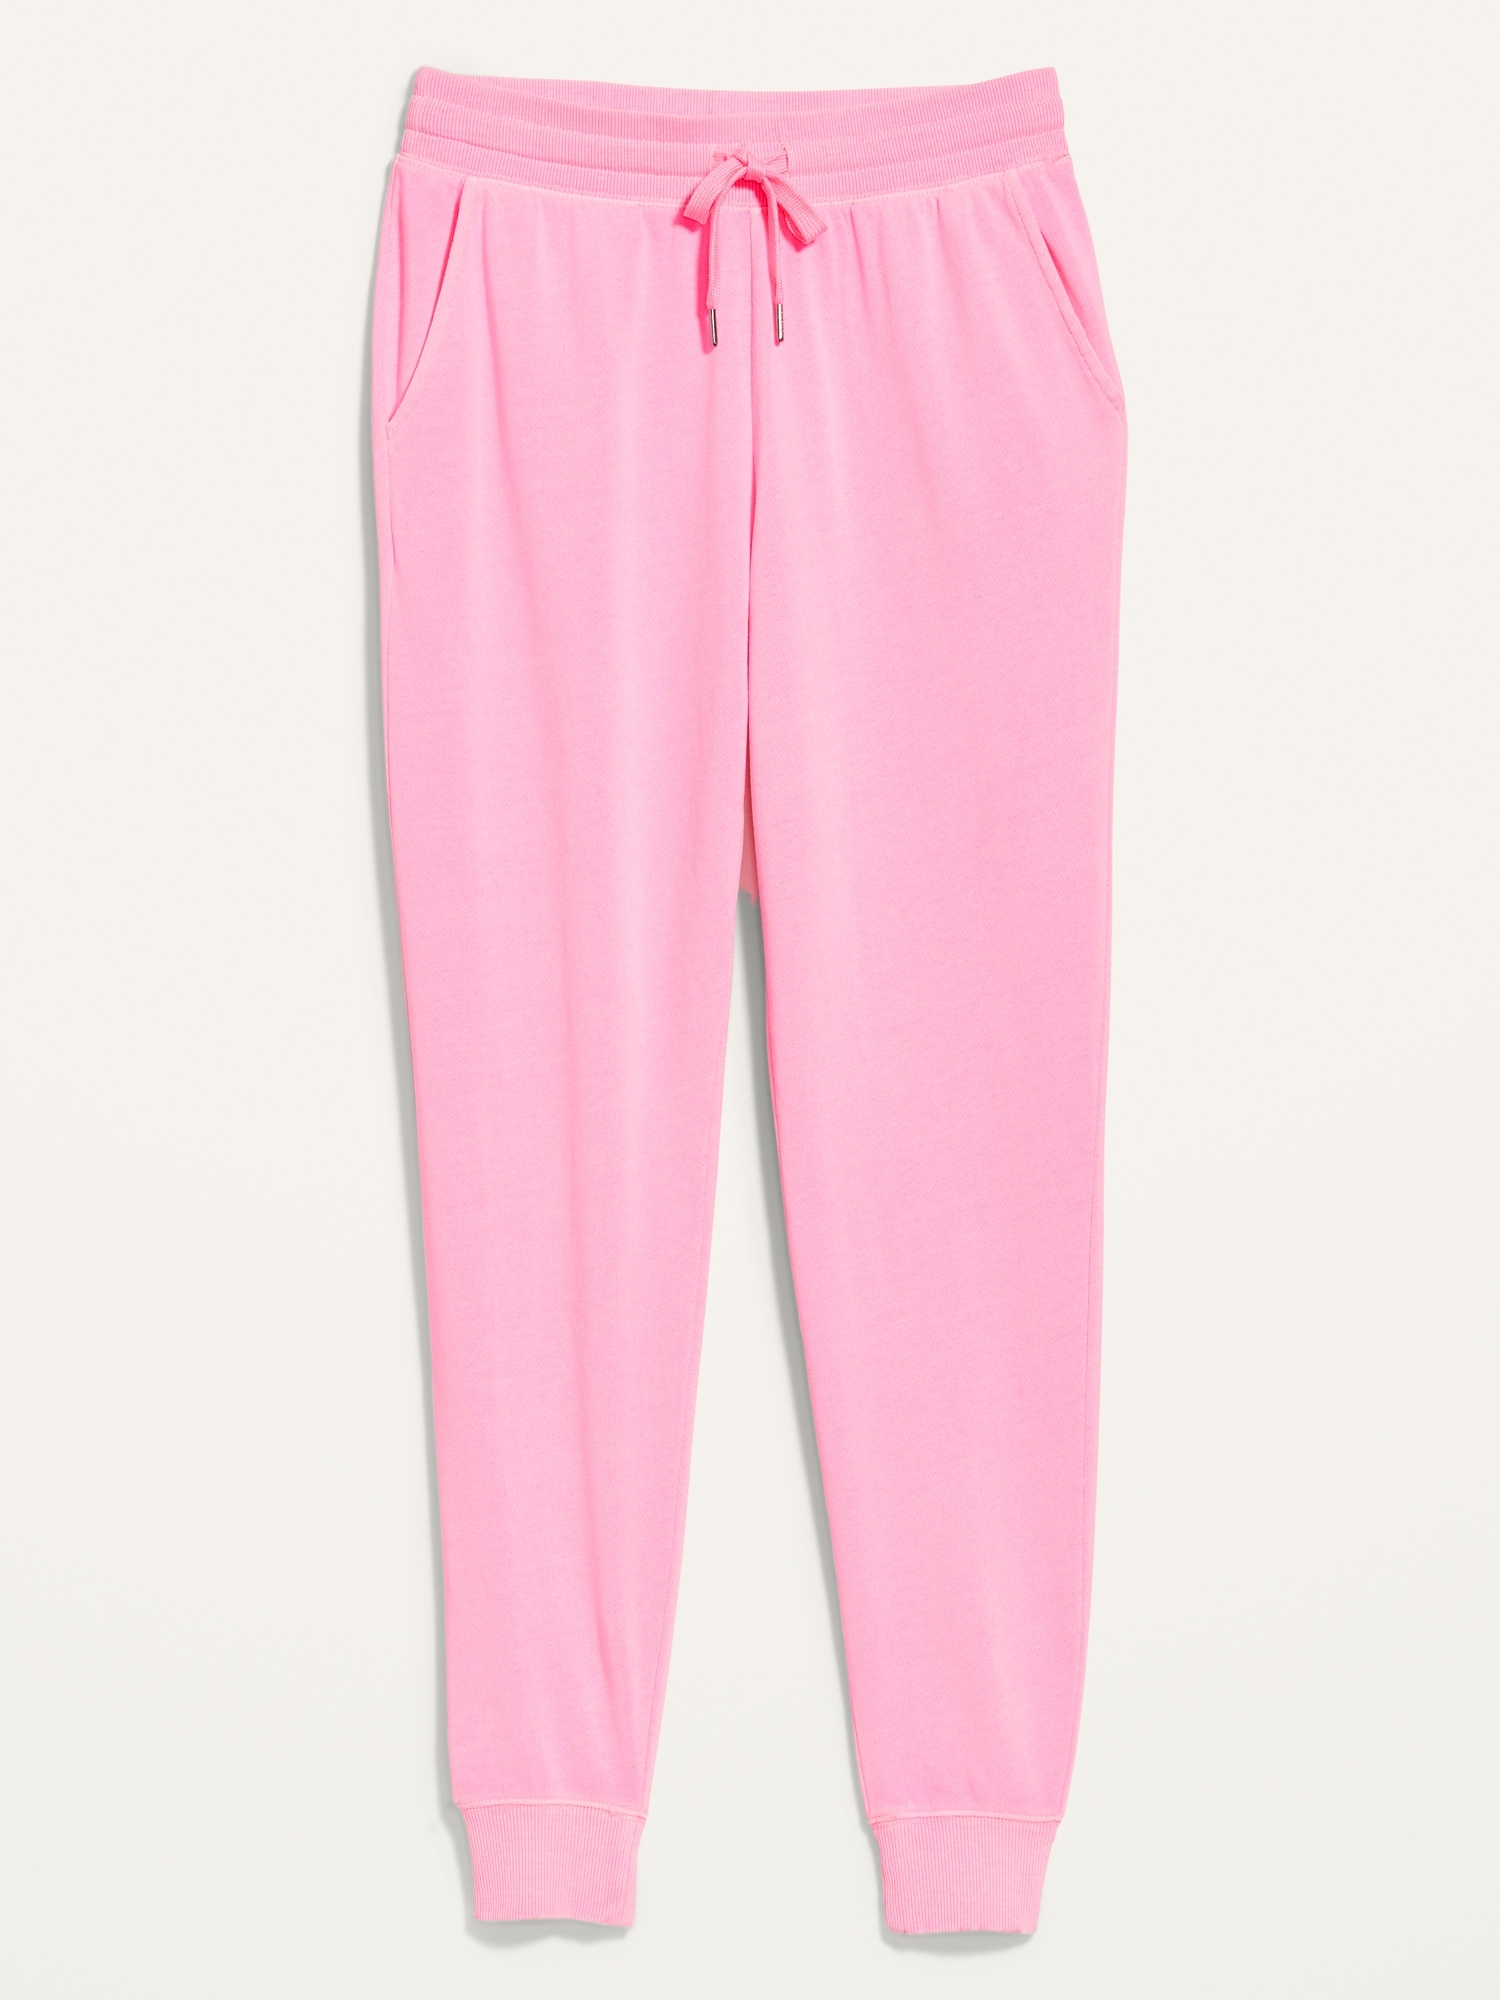 Mid-Rise Vintage Street Jogger Sweatpants for Women | Old Navy